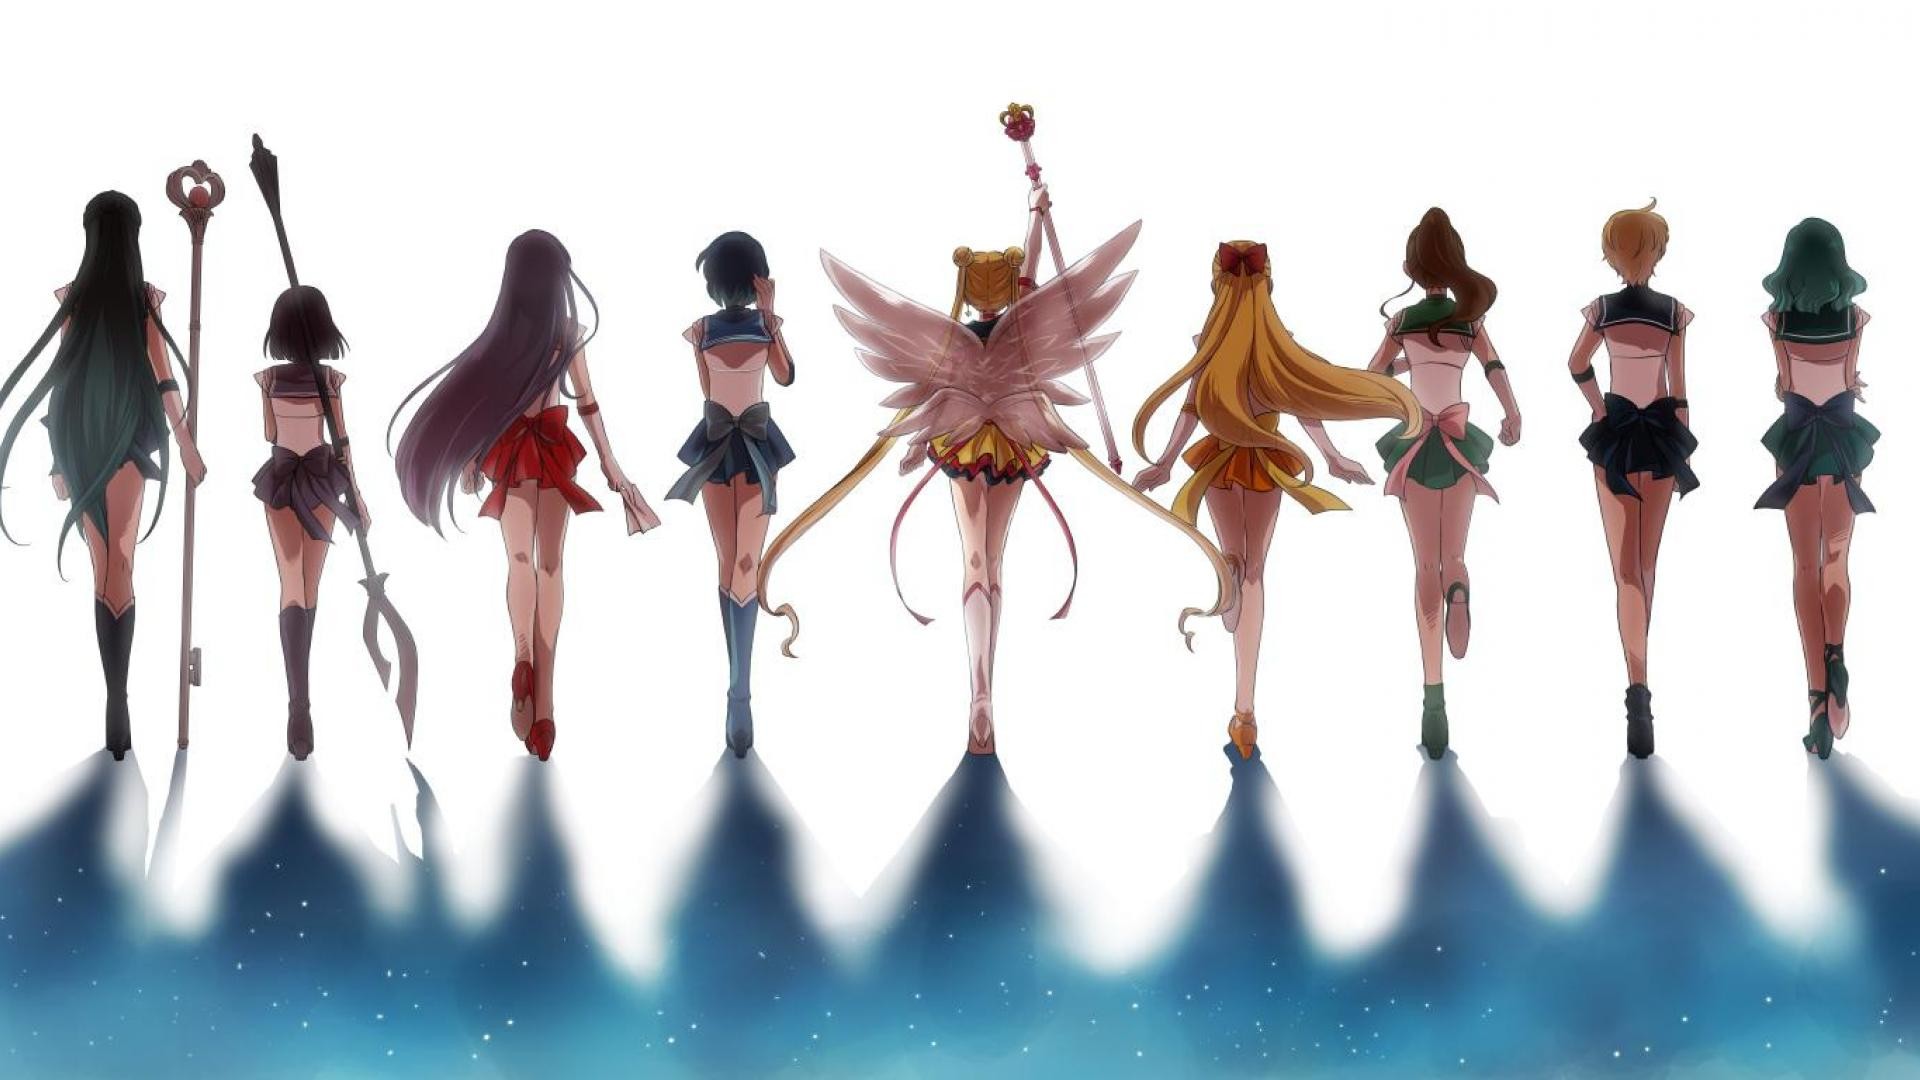 Sailor Moon HD Wallpapers and Backgrounds 1024768 Sailor Moon Wallpaper 39 Wallpapers Adorable Wallpapers Desktop Pinterest Sailor moon wallpaper